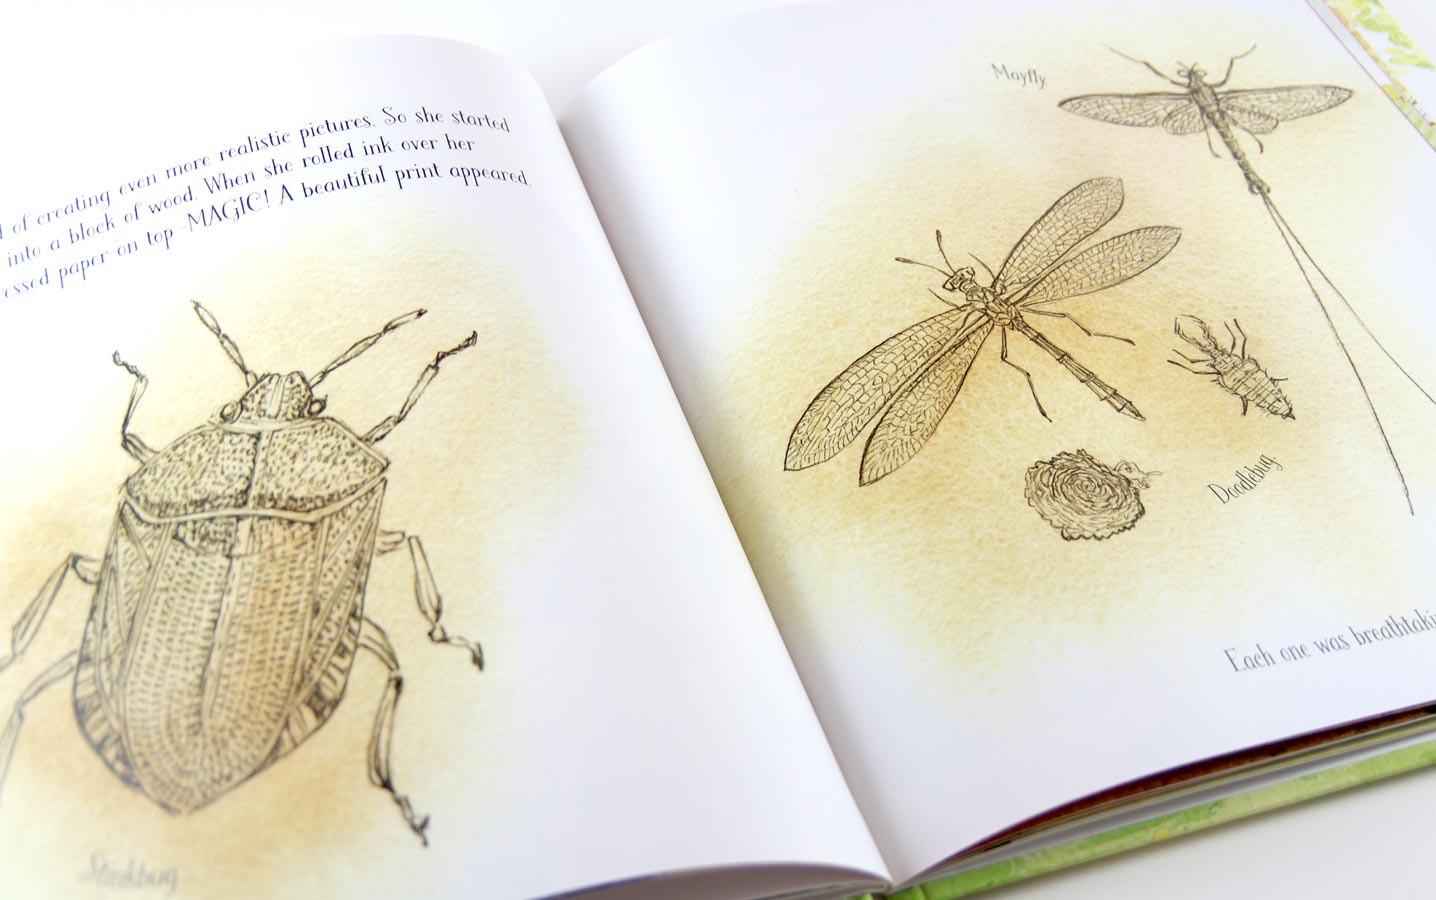 Watercolor illustration of insects drawn in the style of Anna Comstock's prints